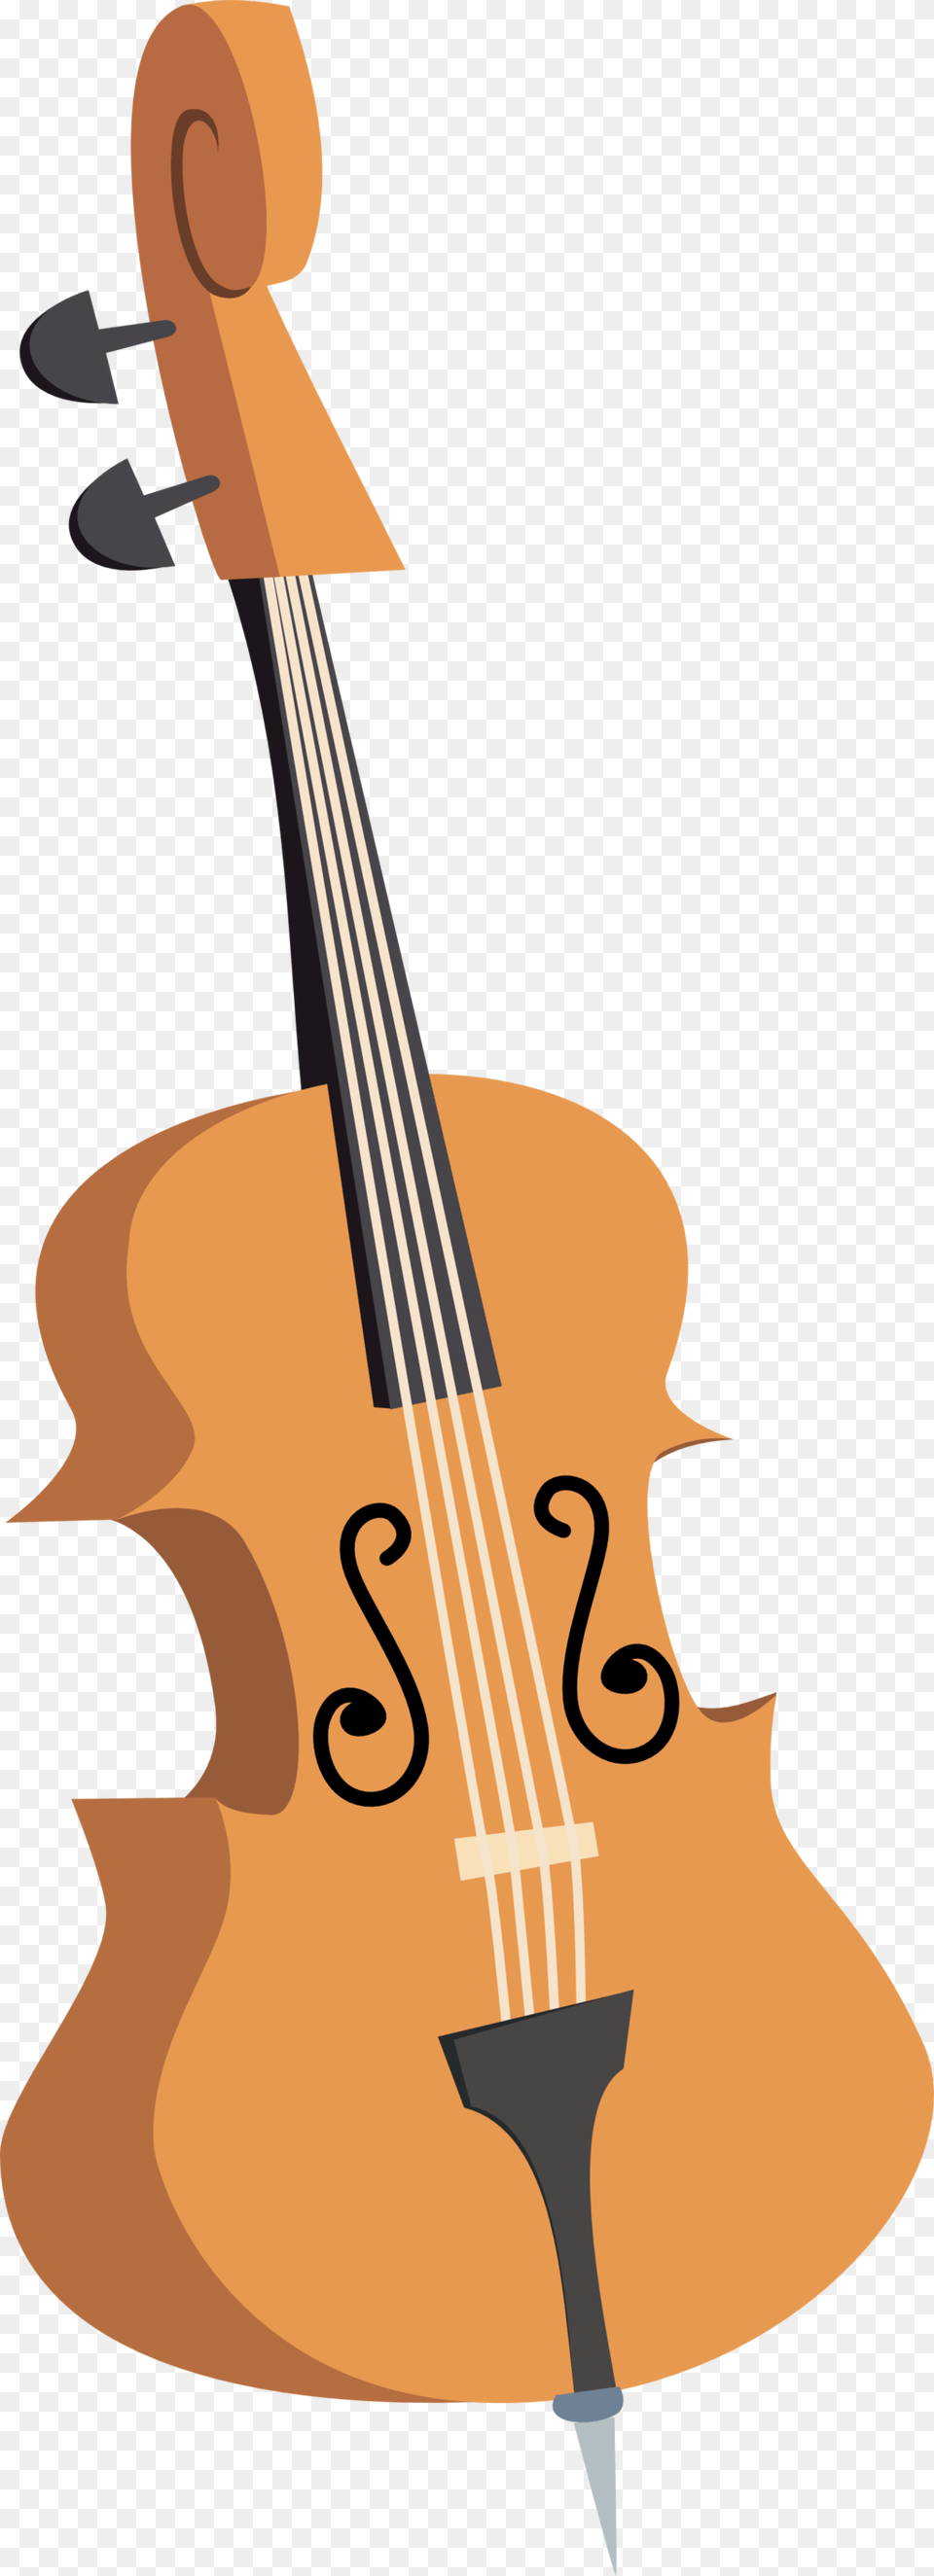 Collection Of Free Cellos Stand Up Bass Vector, Cello, Musical Instrument, Guitar Png Image